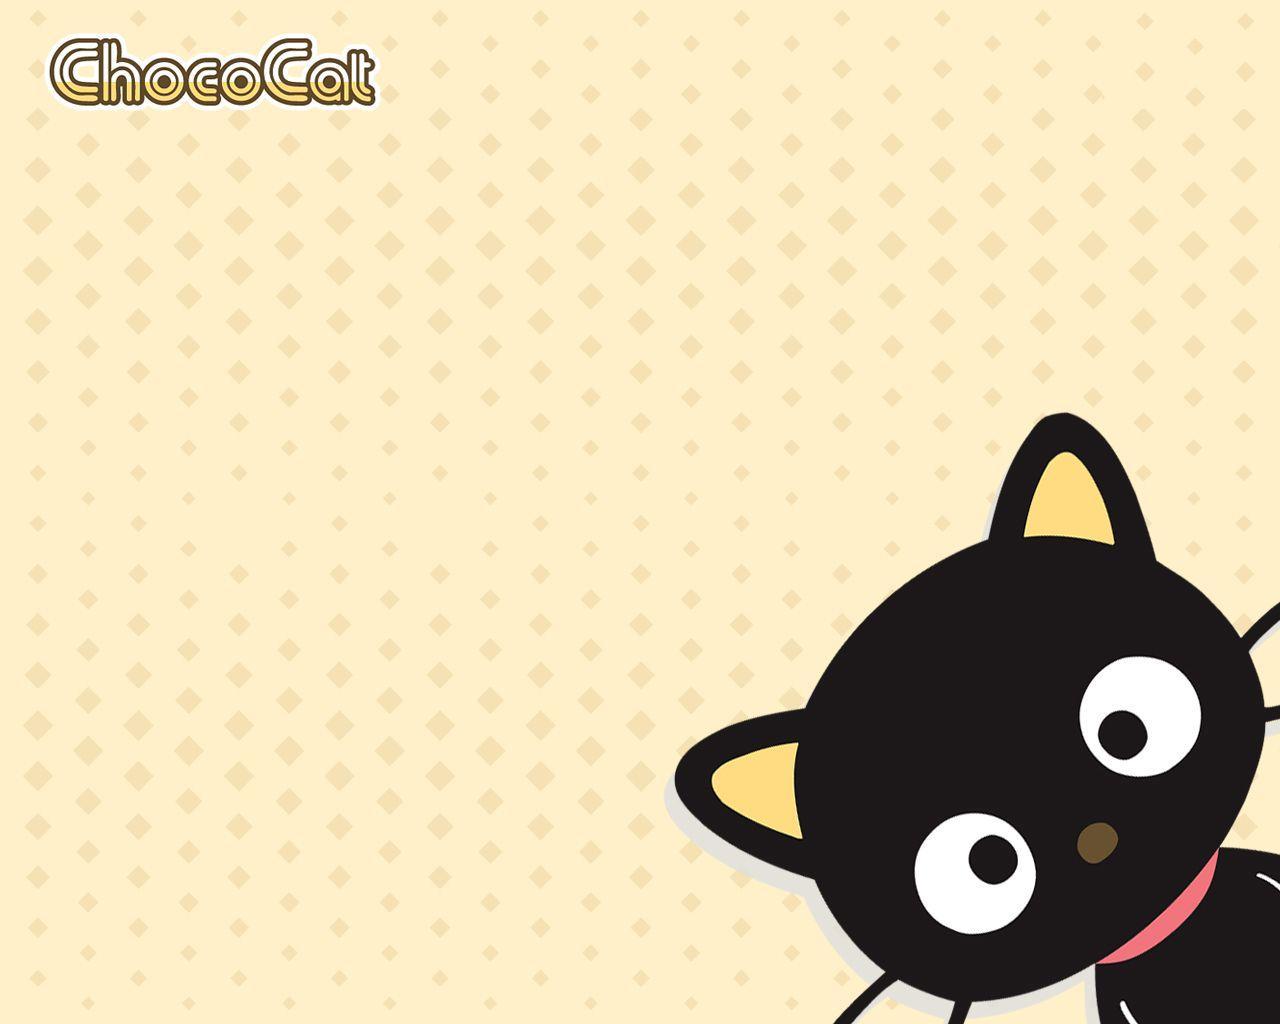 Sanrio on X Take Chococat on the go with new backgrounds for your  phone Choose and download your favorite wallpaper  httpstco6He9SAvI4i Chococat25 SanrioFOTM httpstco1Mt5XP1iRU  X